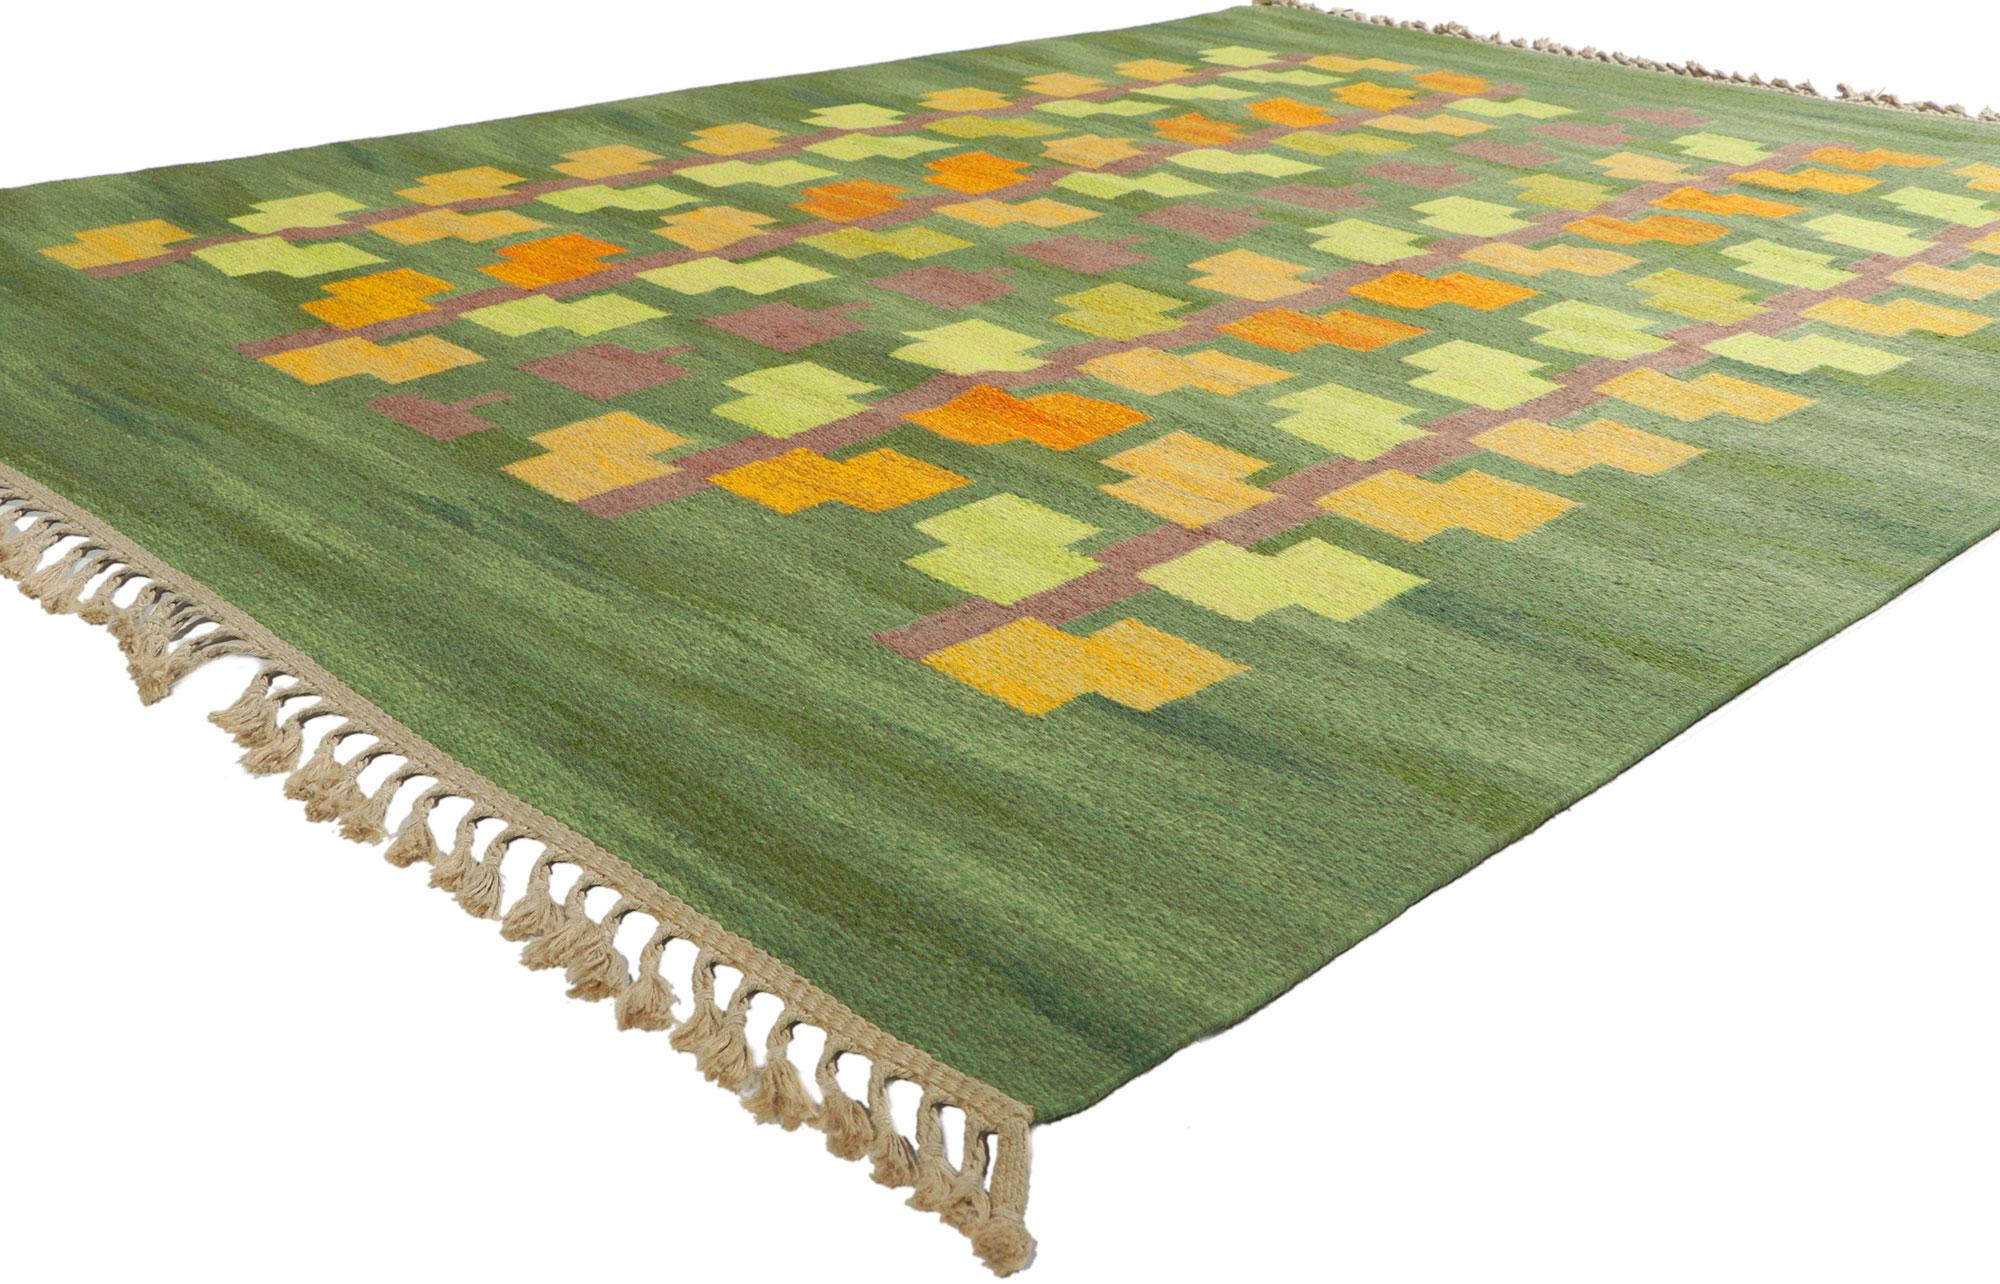 78489 Vintage Swedish Kilim Rollakan Rug by Judith Johansson, 06'04 x 08'07. With its Scandinavian Modern style, incredible detail and texture, this handwoven wool vintage Swedish rollakan rug is a captivating vision of woven beauty. The